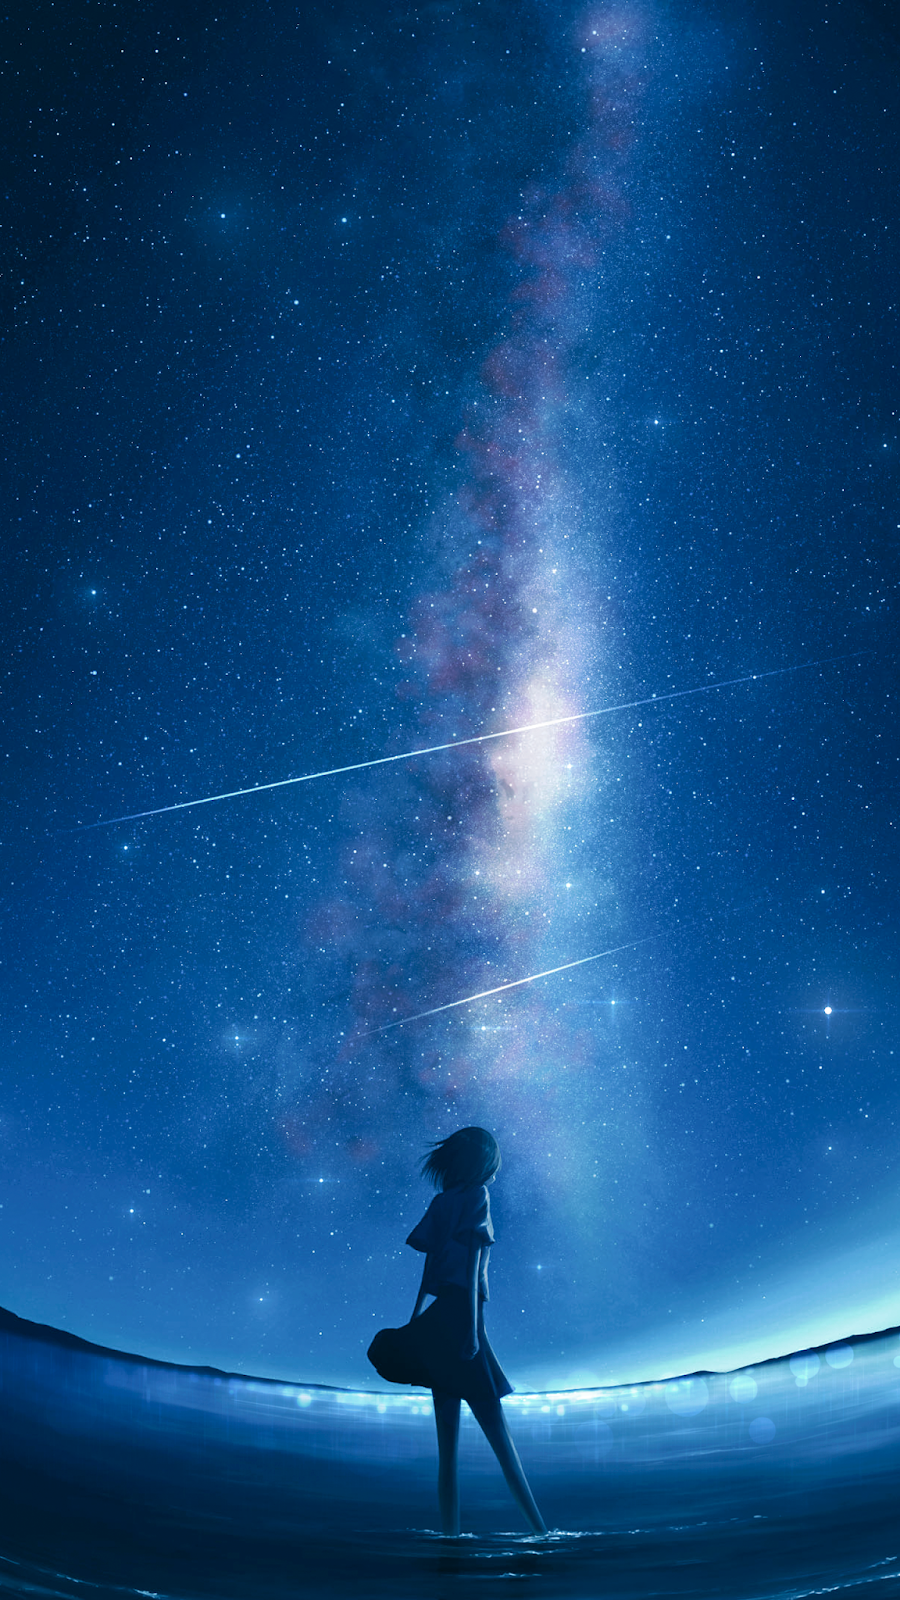 Alone in the starry night #wallpaper #iphone #android #background #followme. Anime scenery wallpaper, Anime scenery, Sky anime